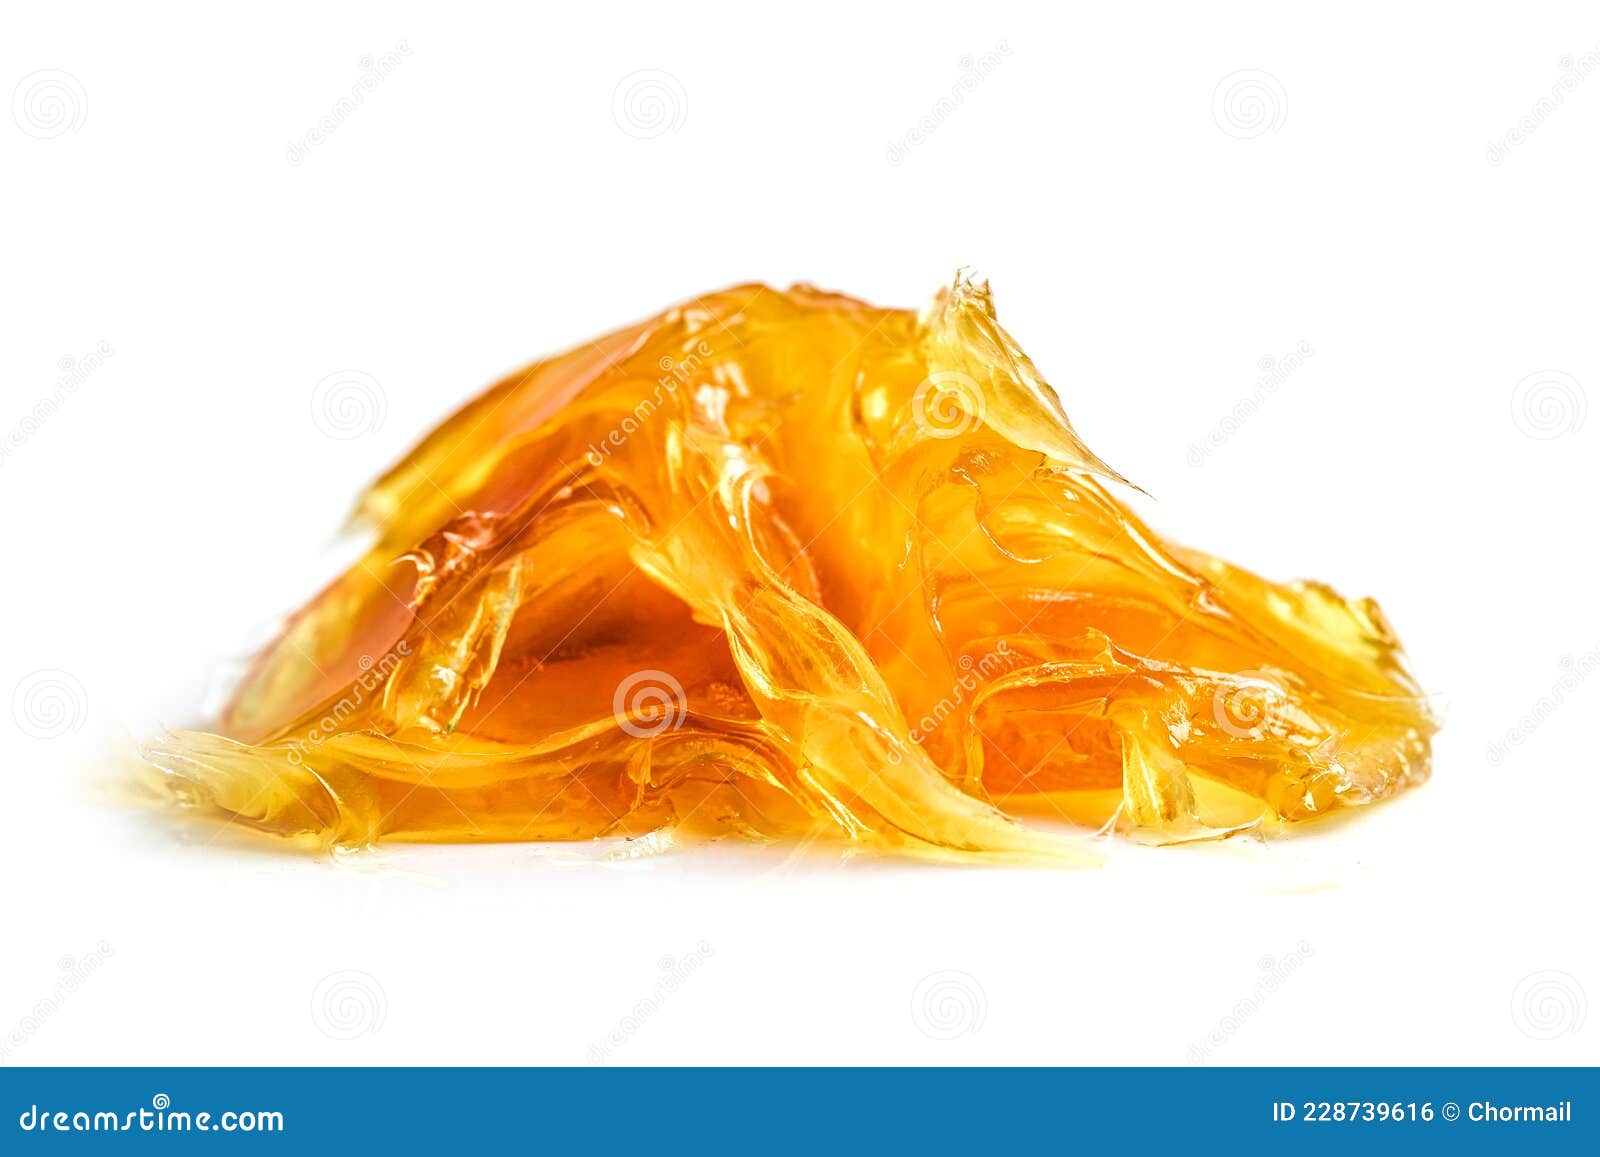 Lithium stored in oil - Stock Image - C011/9604 - Science Photo Library